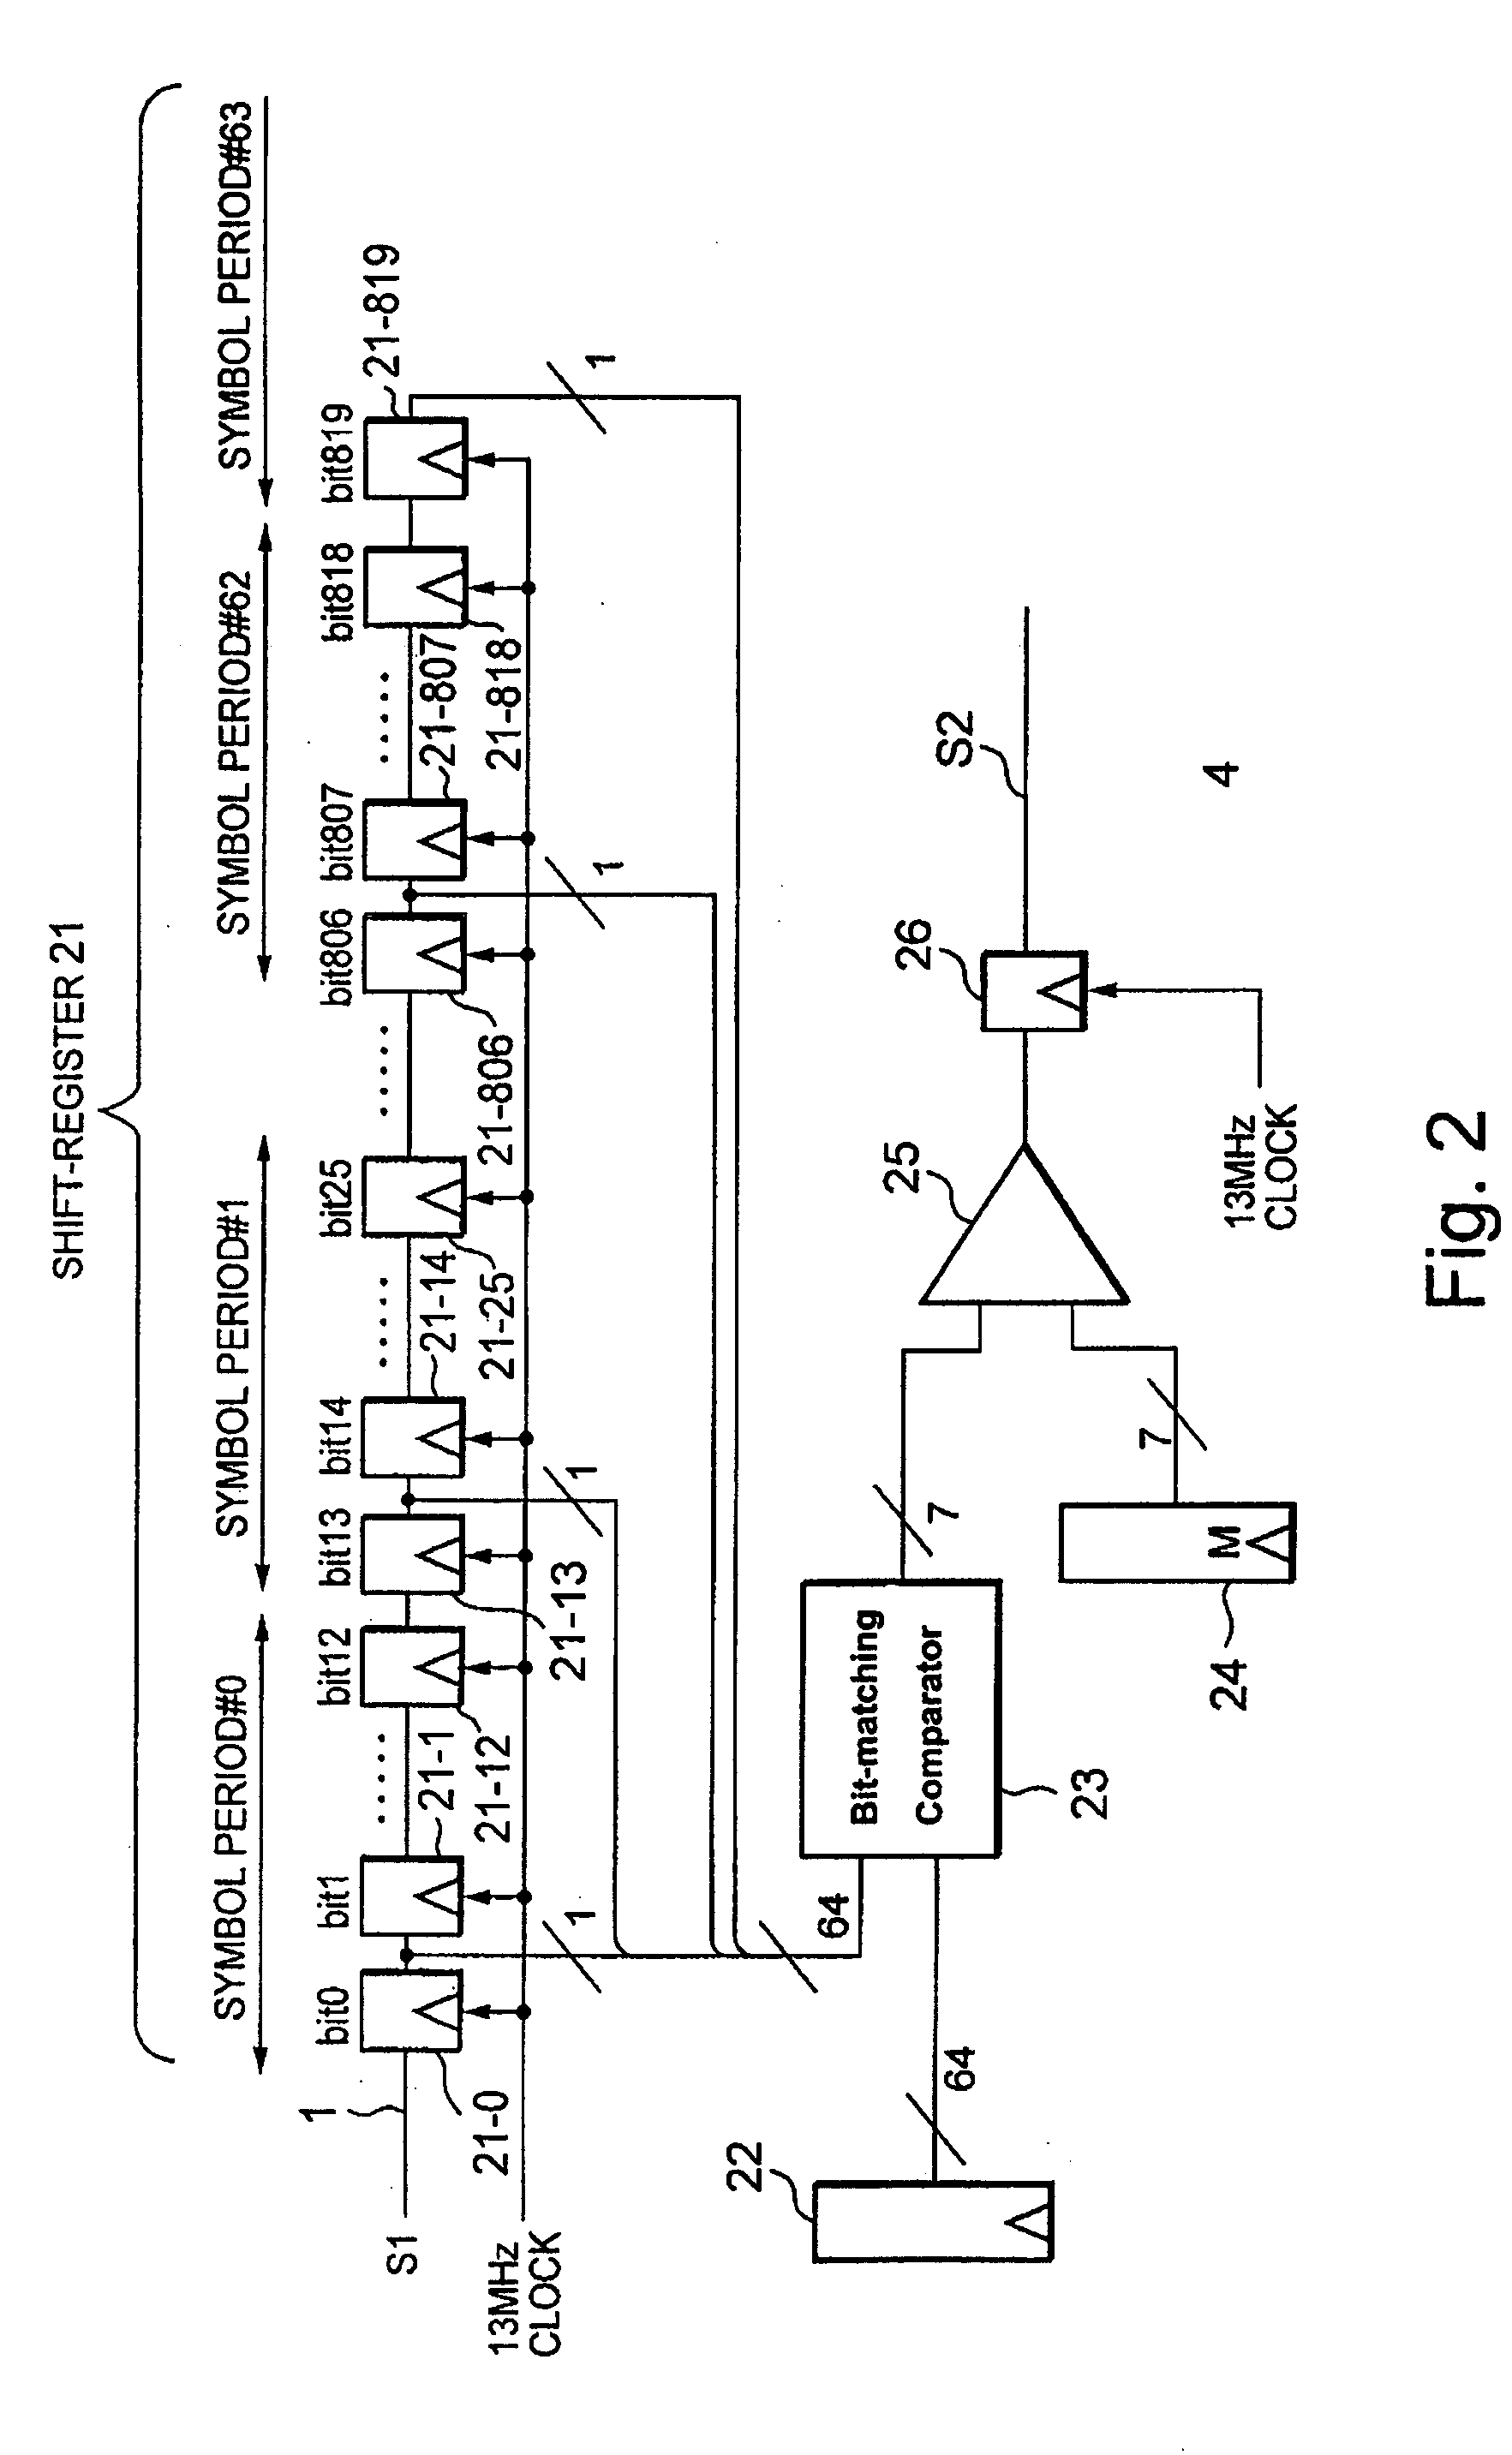 Syncword detecting circuit and a baseband signal receiving circuit